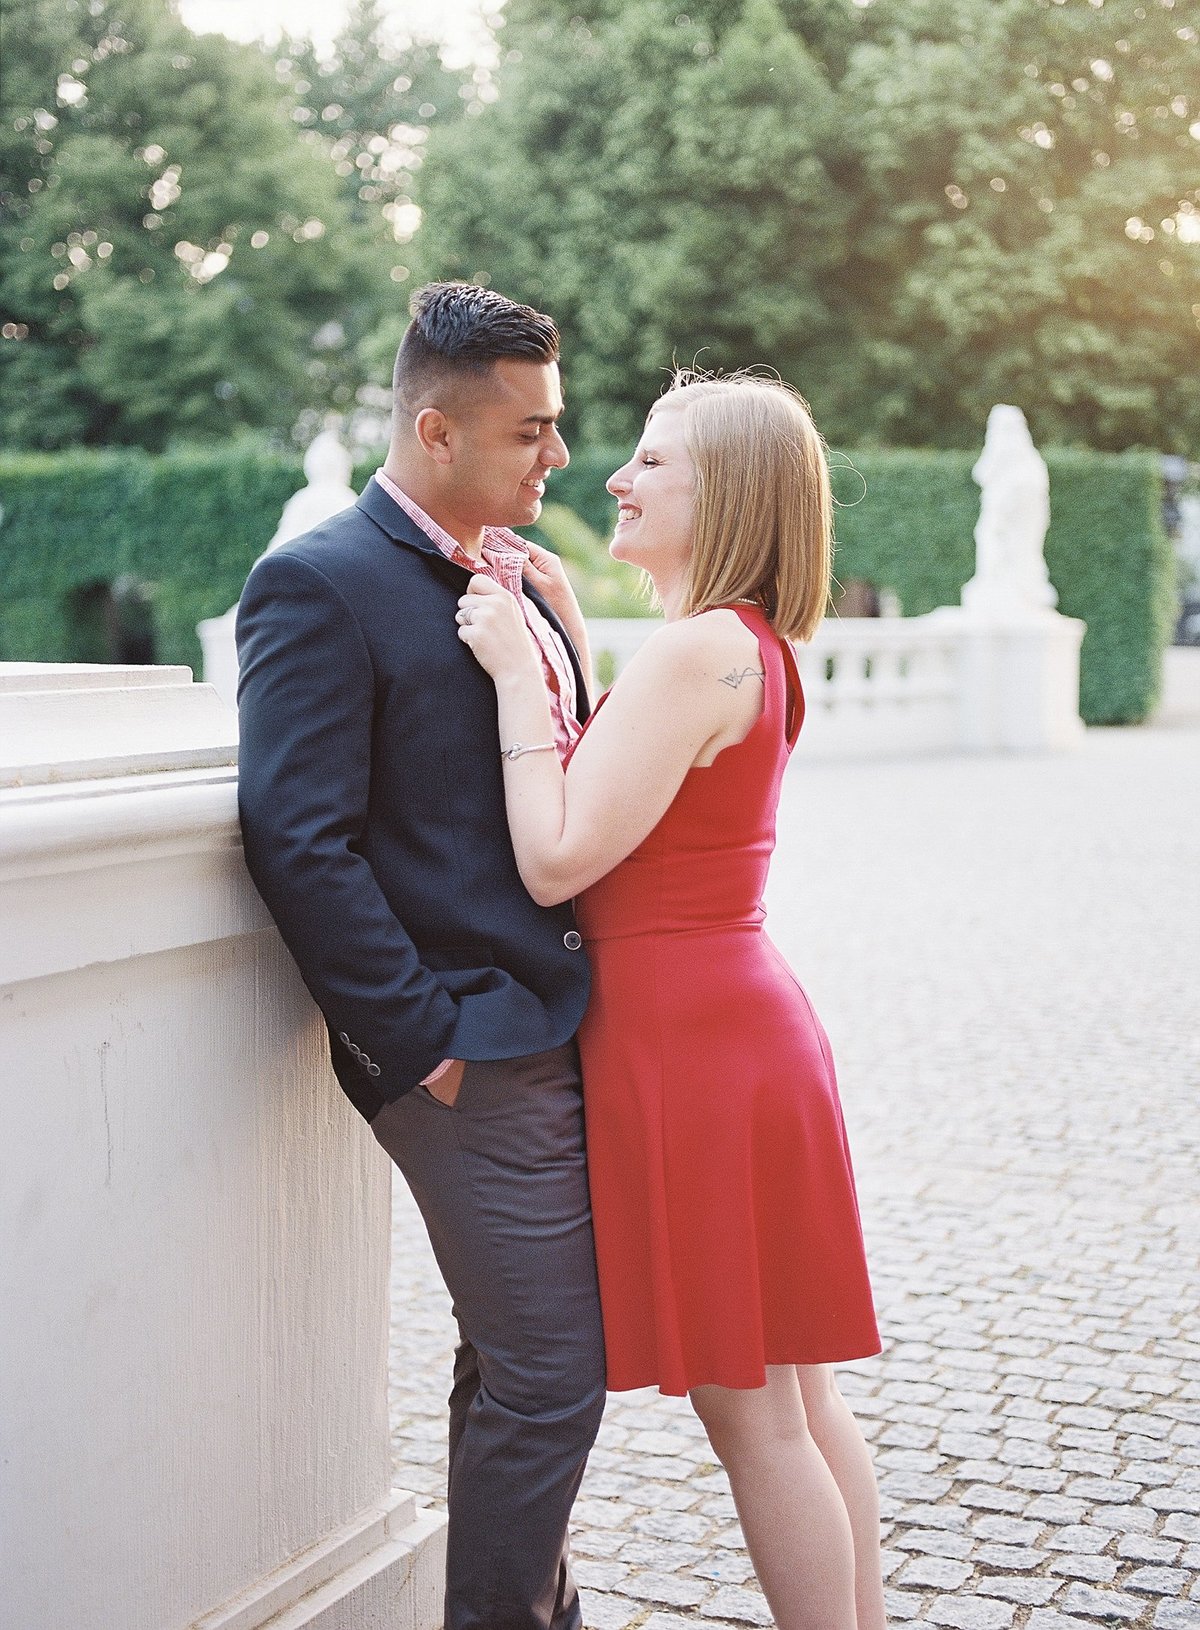 Romantic European Palace Anniversary Session photographed by France destination wedding photographer Alicia Yarrish Photography on film